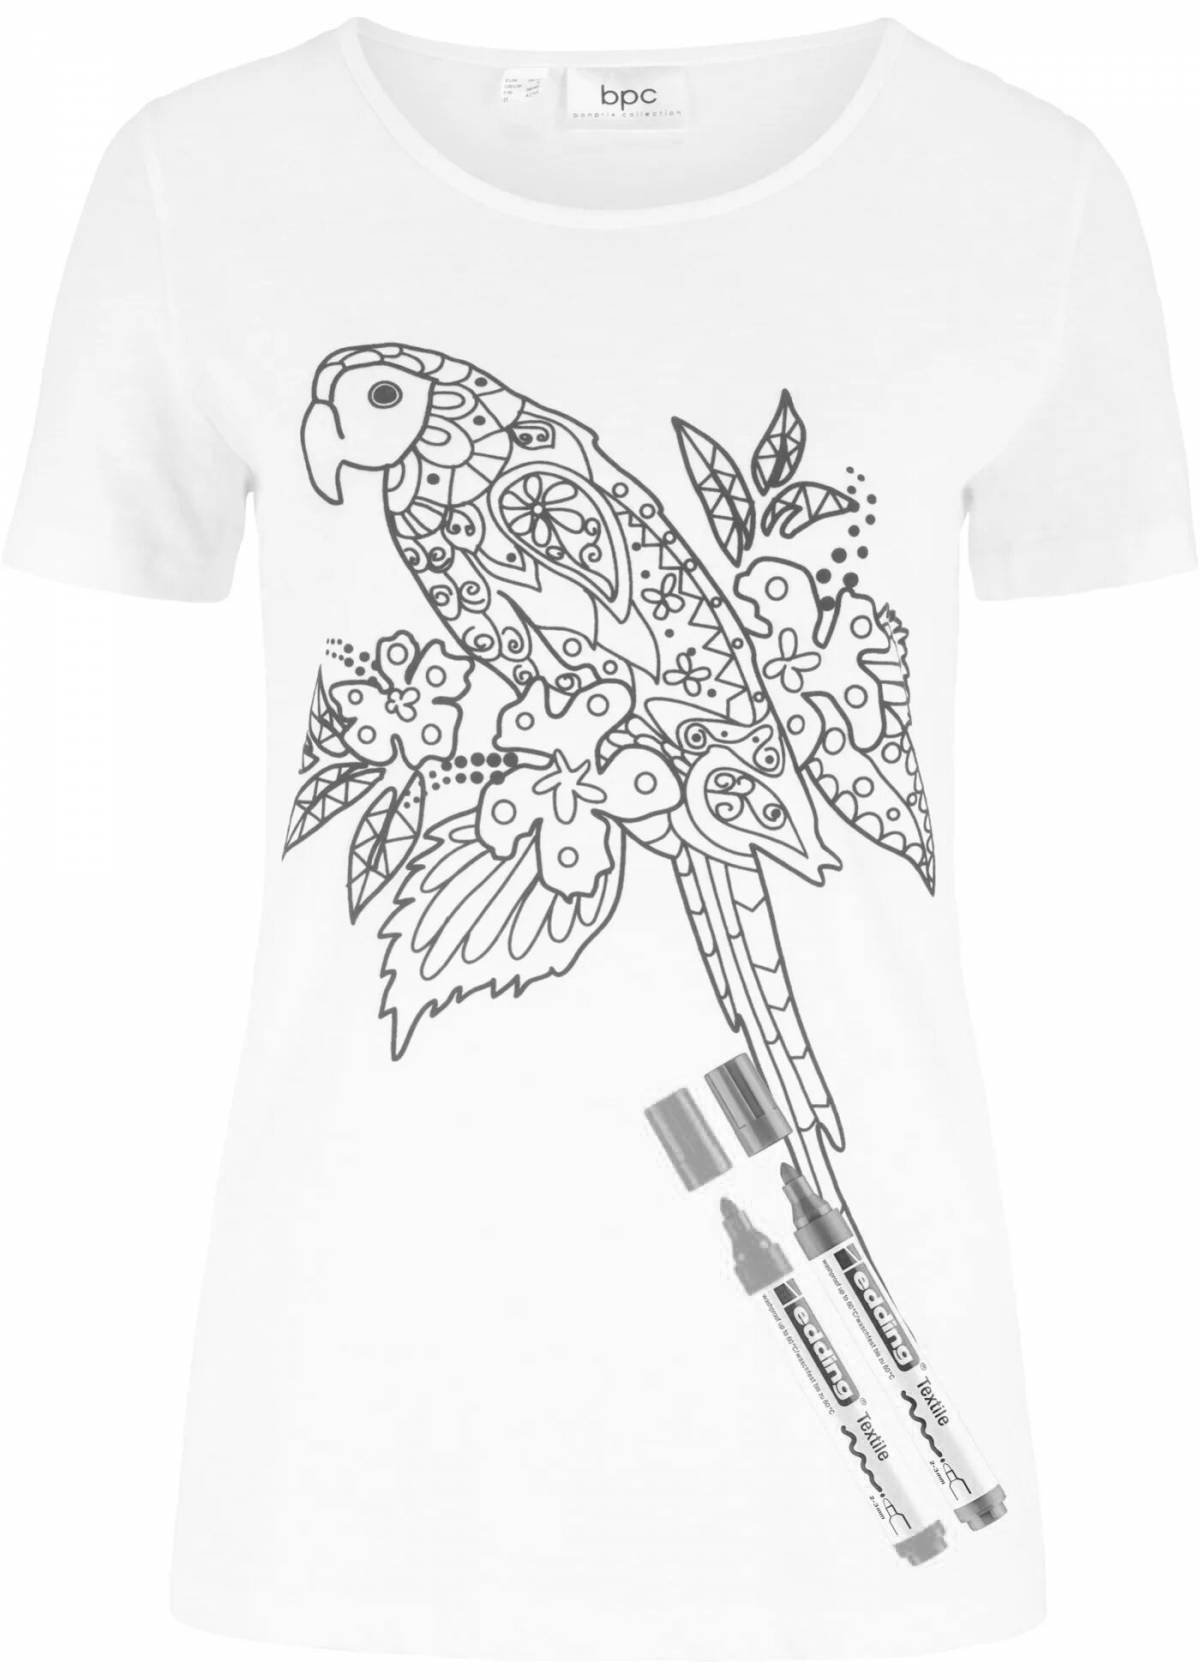 Coloring page with a spectacular t-shirt